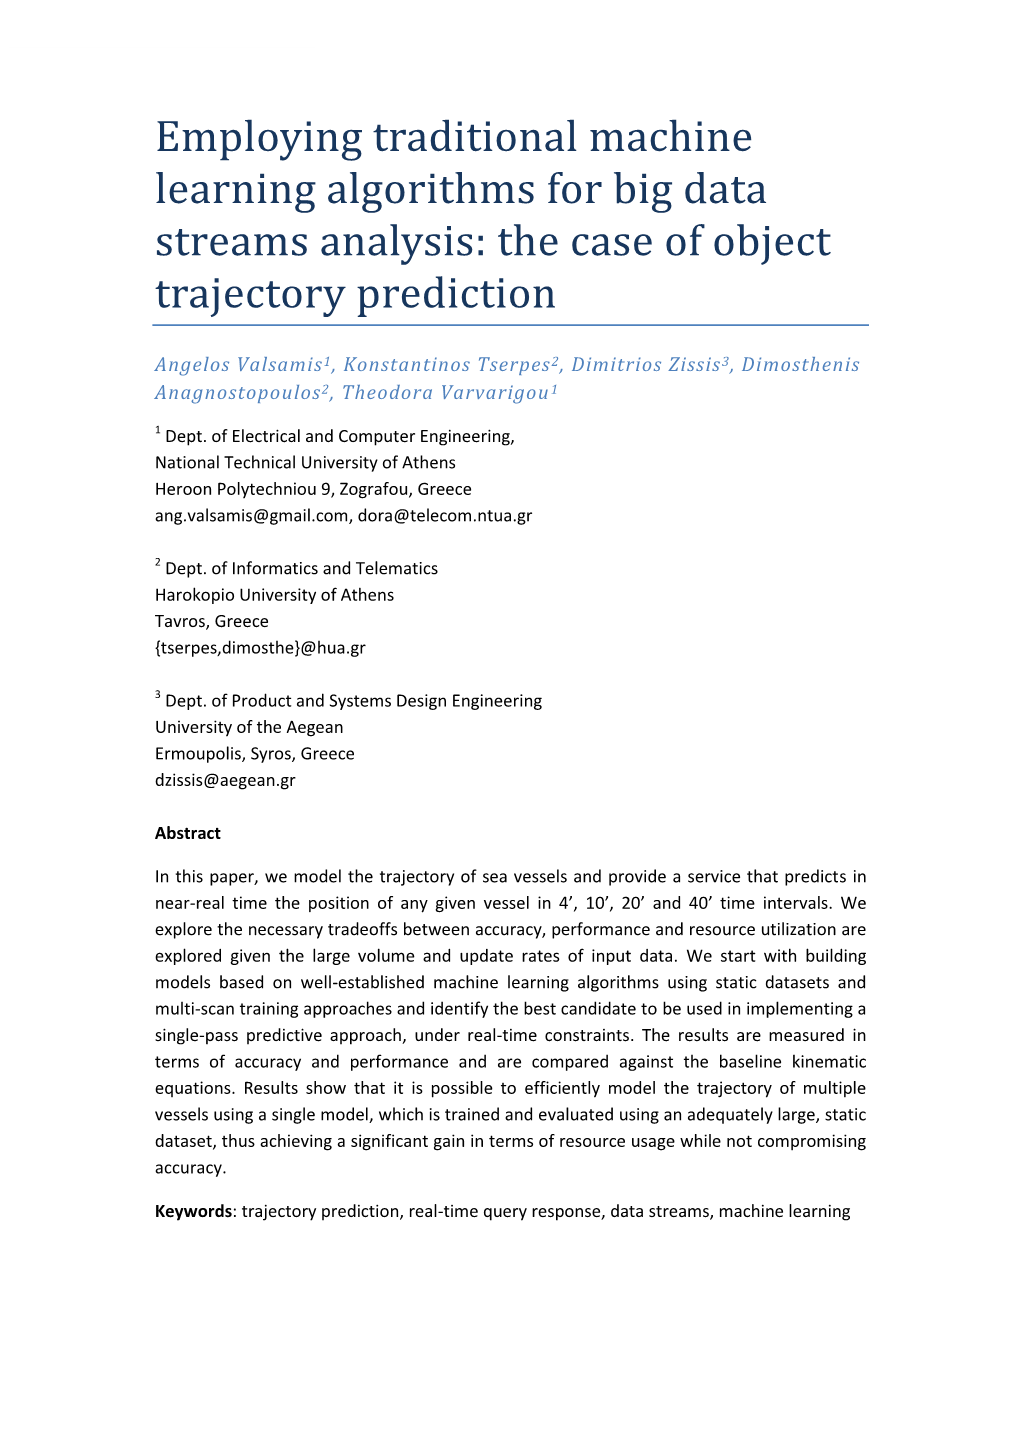 Employing Traditional Machine Learning Algorithms for Big Data Streams Analysis: the Case of Object Trajectory Prediction